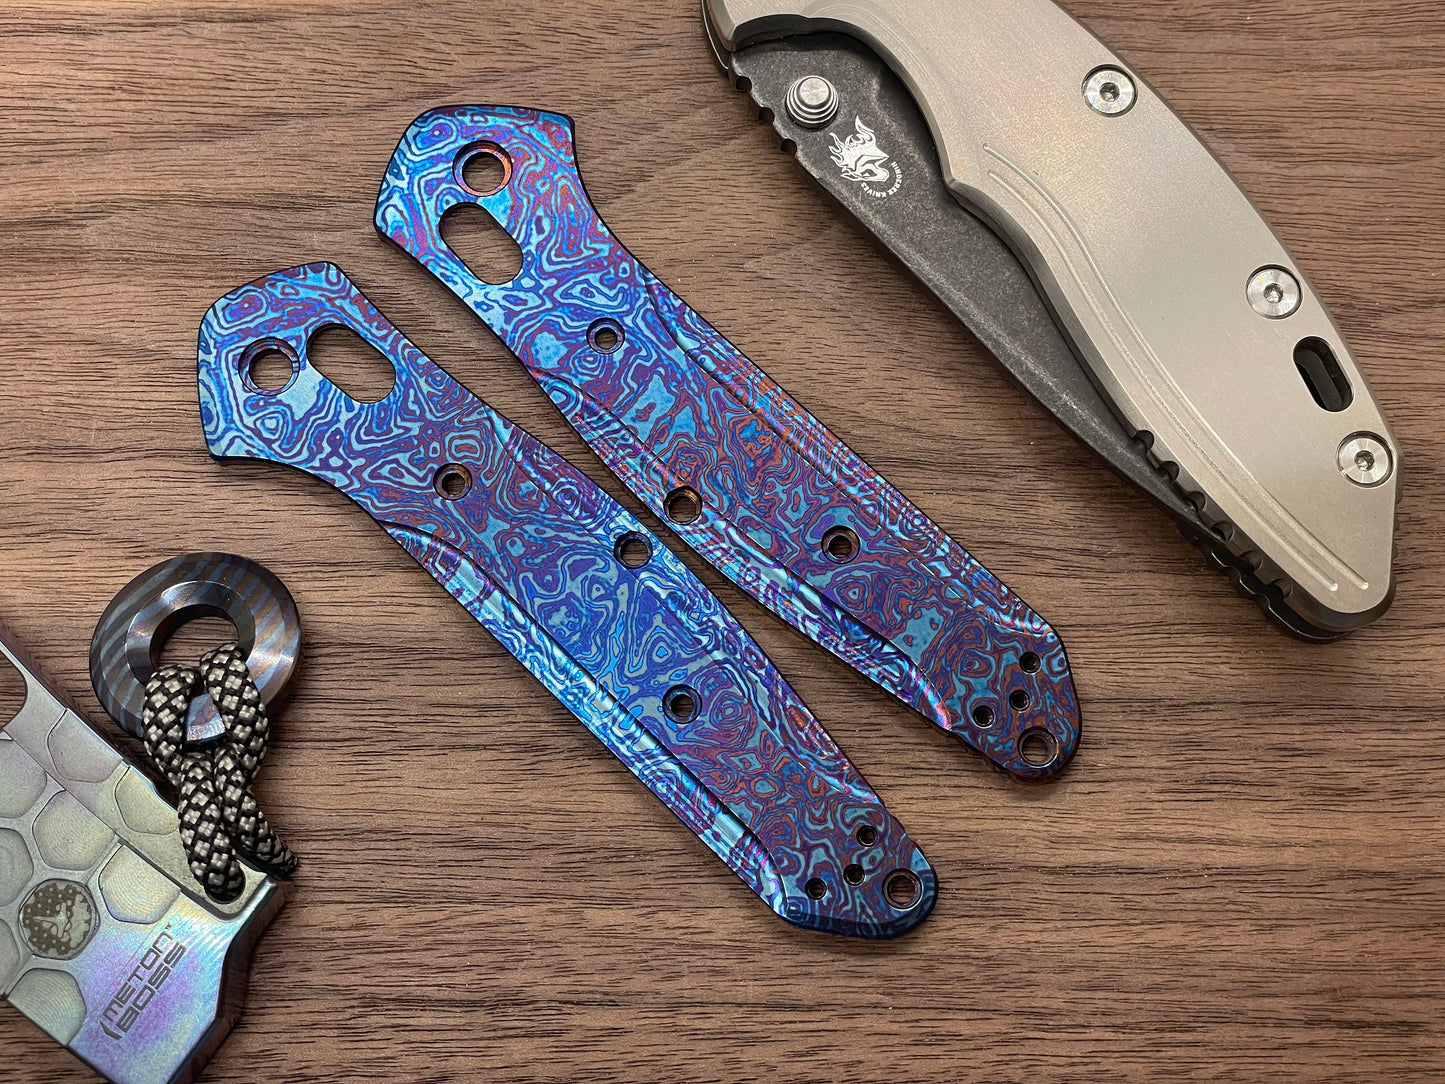 Flamed ALIEN heat ano engraved Titanium Scales for Benchmade 940 Osborne